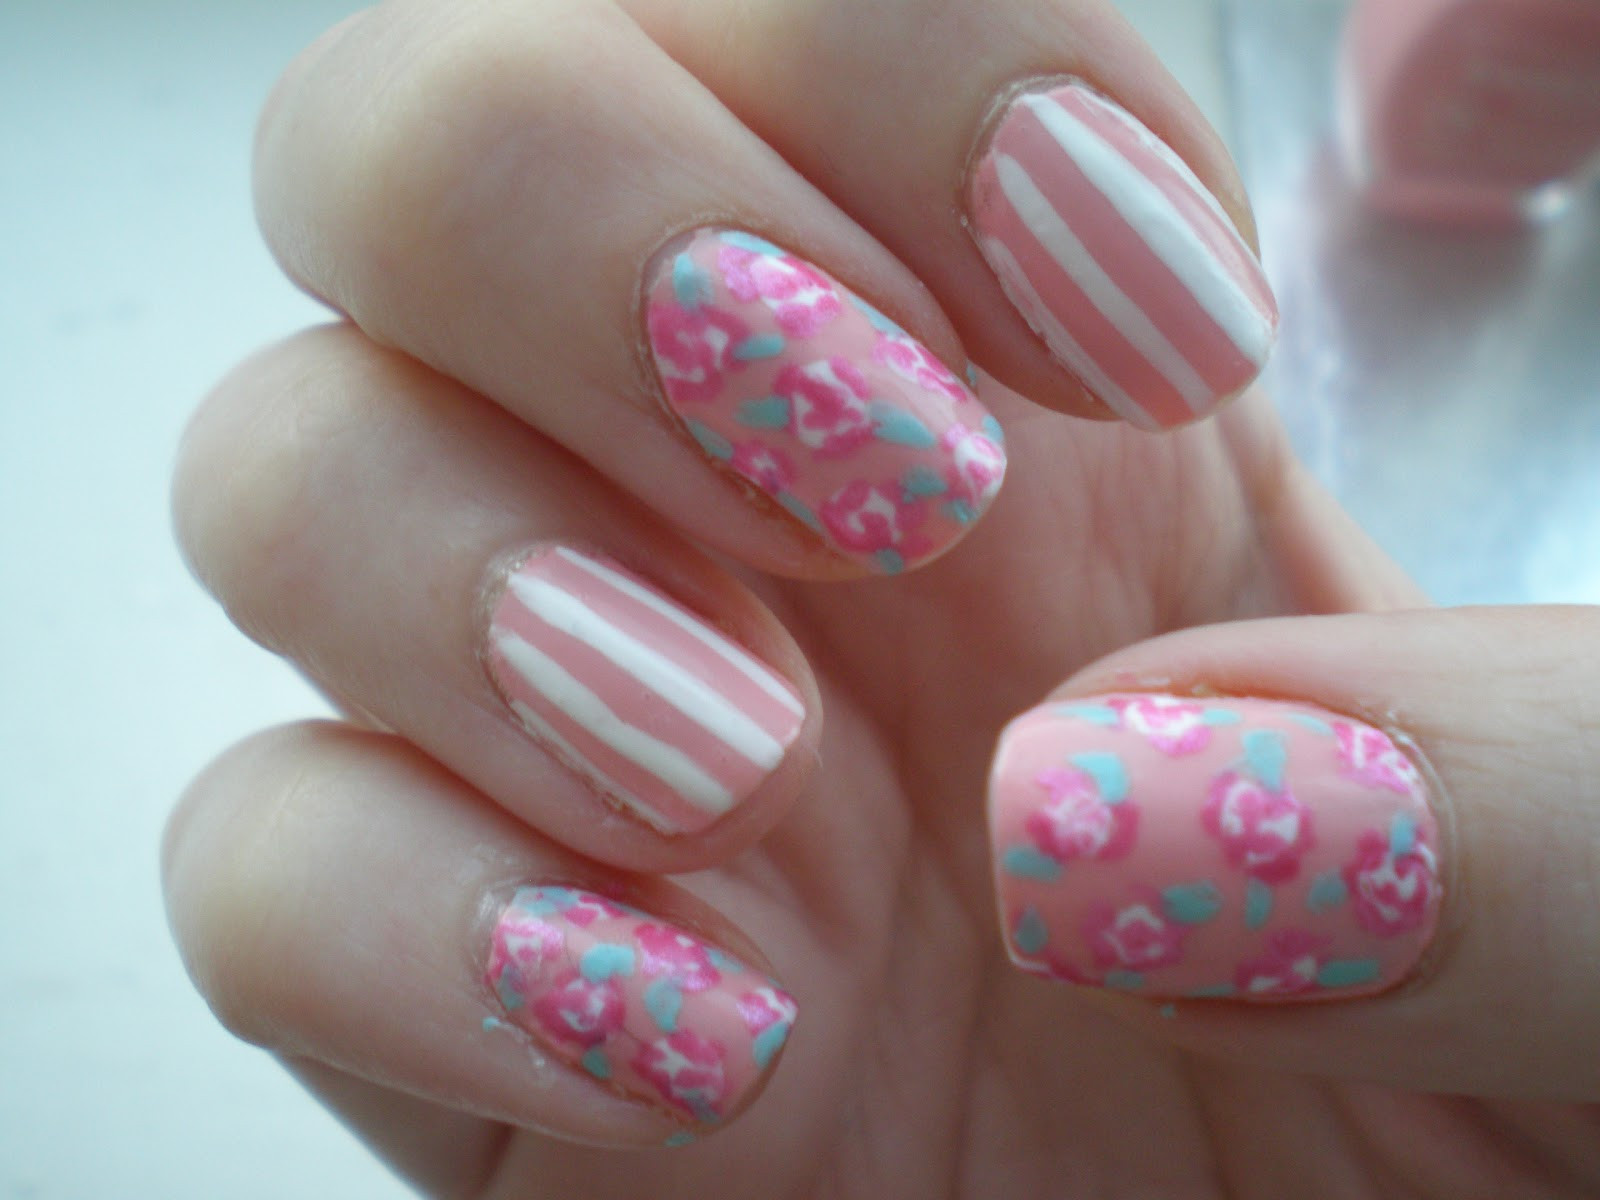 Vintage Nail Designs
 The Sleepy Magpie Floral and striped nails Nail art